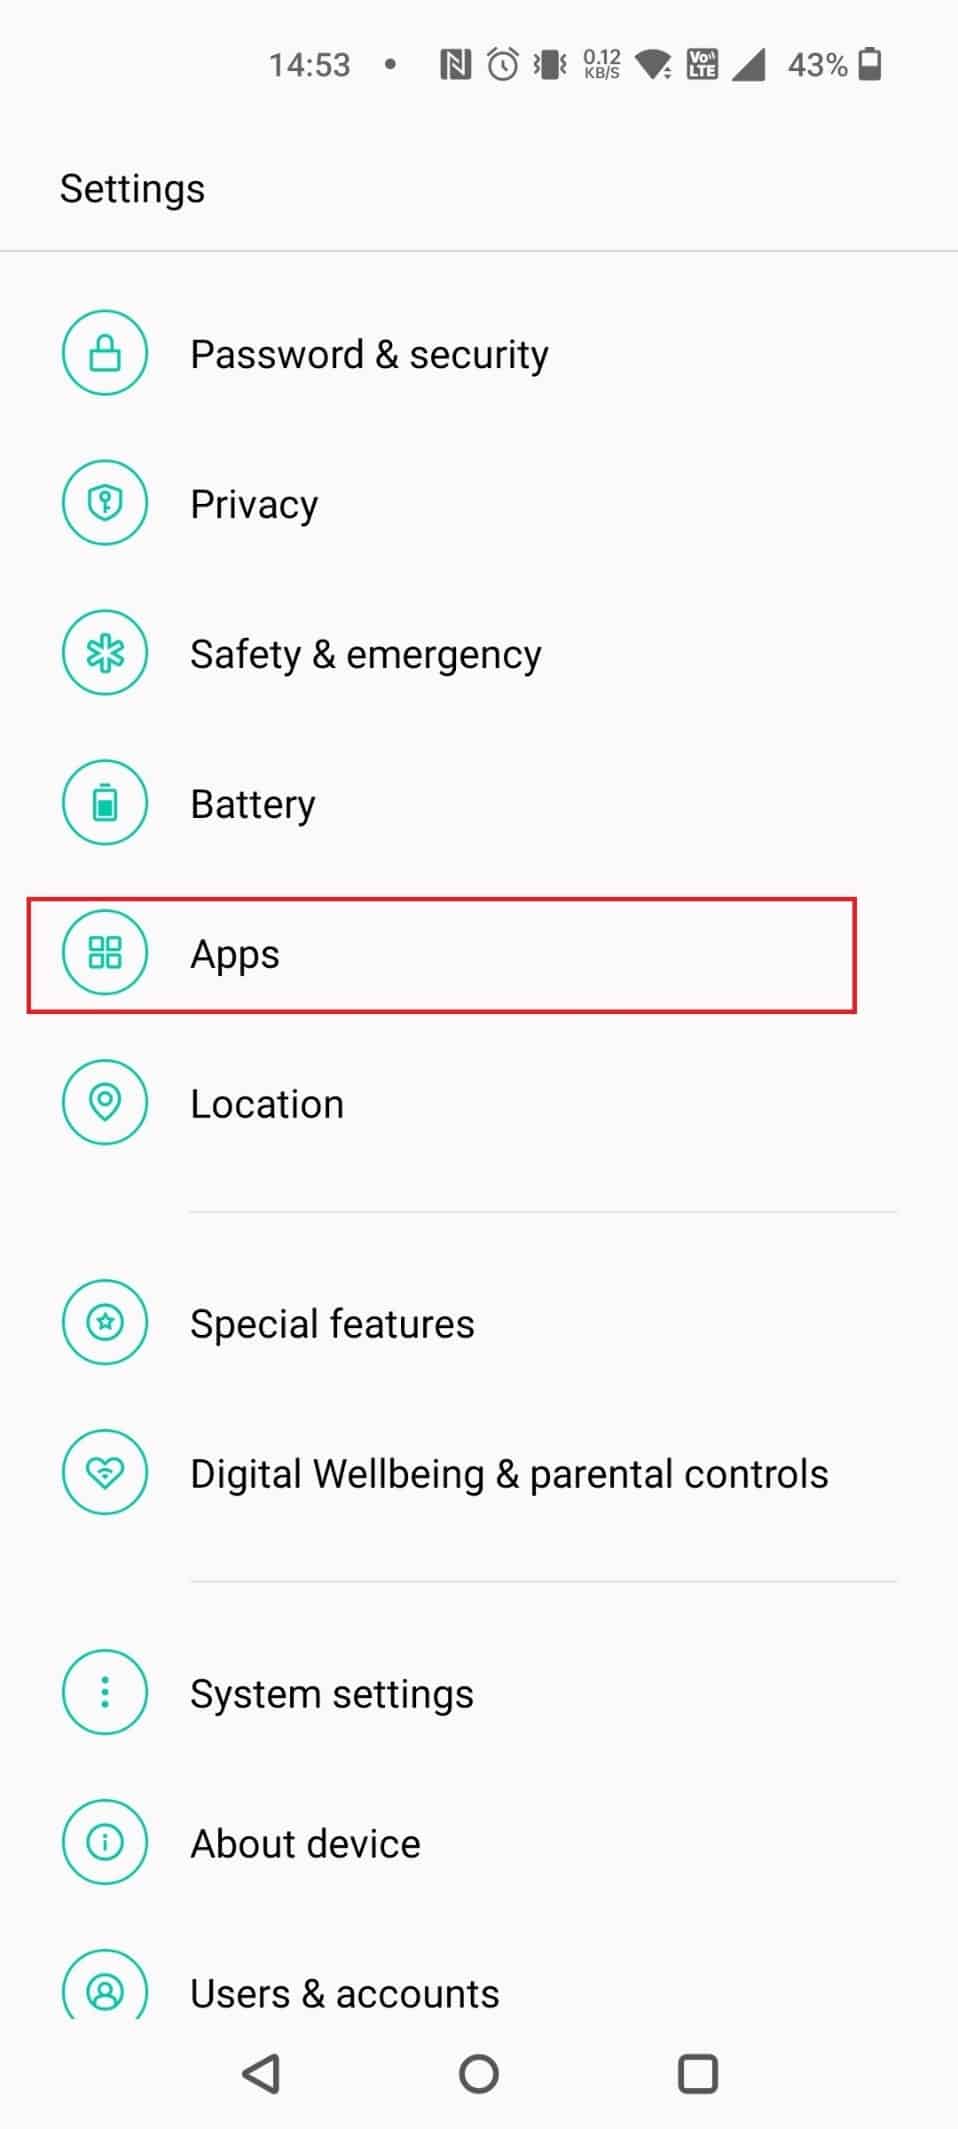 Swipe down and tap on Apps | How to remove family link without parent permission